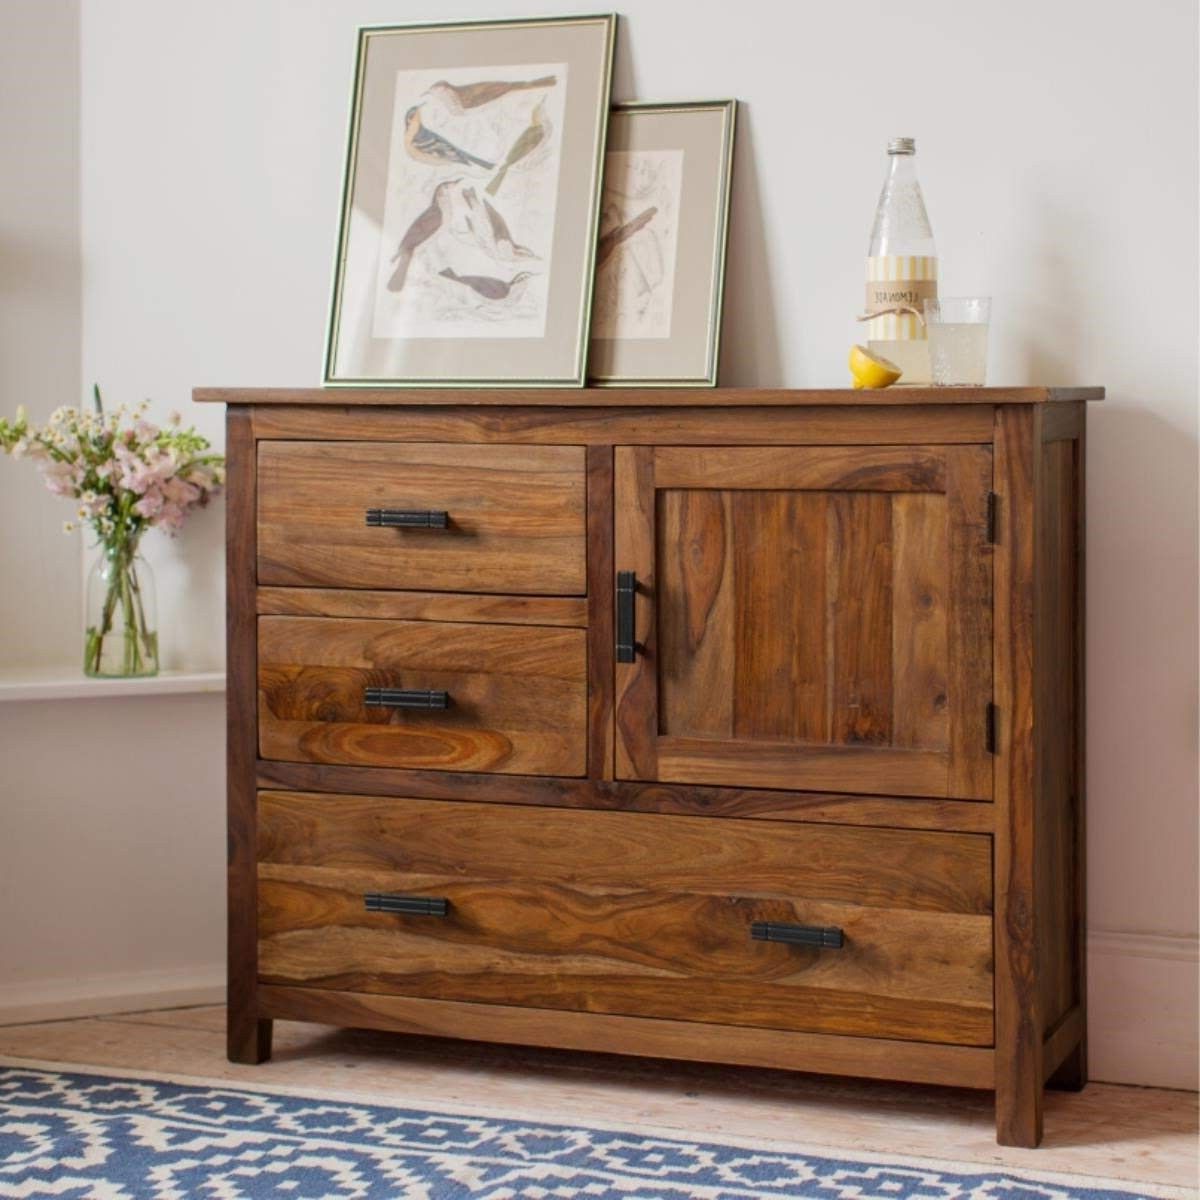 Jett Sheesham Wood Sideboard Cabinet For Living Room Furniture 3 Drawers 1 Cabinet  Storage Natural Honey Finish – Shagun Arts With Wood Cabinet With Drawers (View 6 of 20)